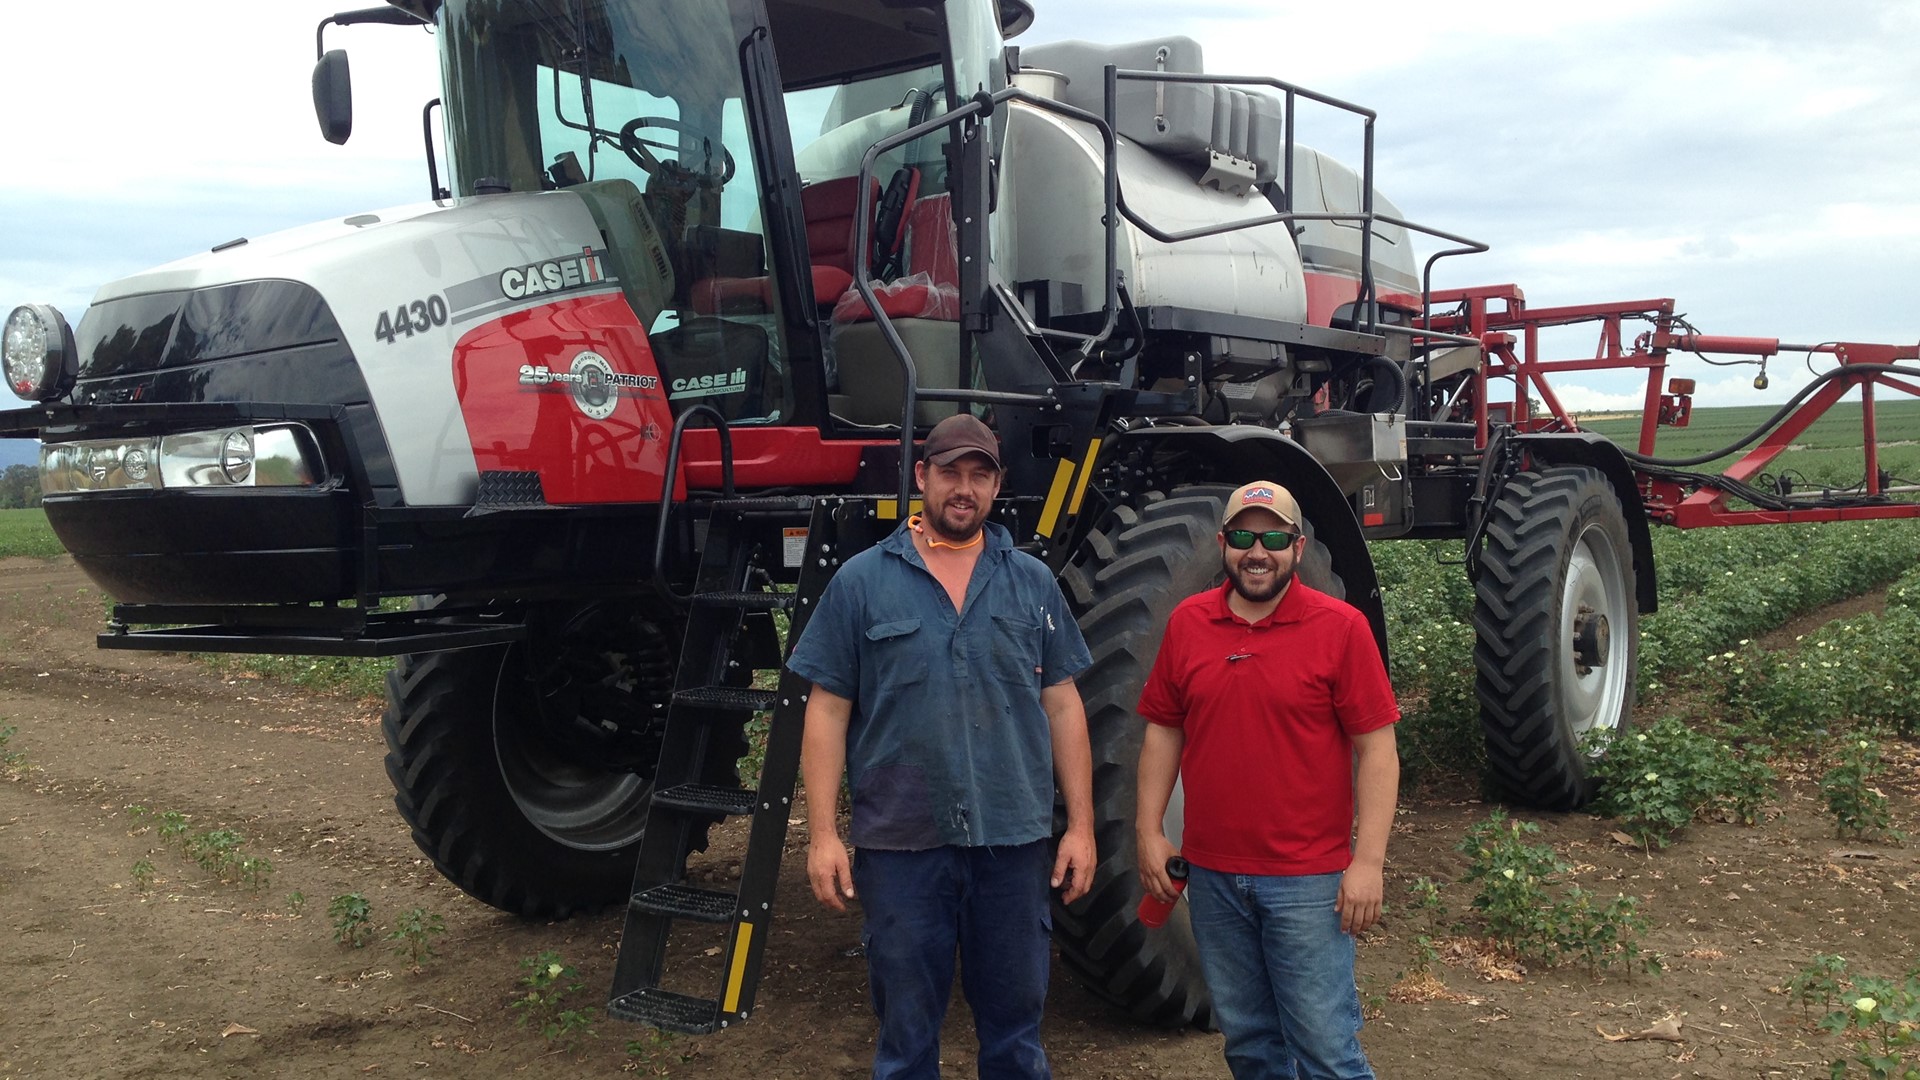 Case IH customer Andrew Lowien with a new special edition Patriot 4430 sprayer, Case IH Product Specialist Andrew Kissel